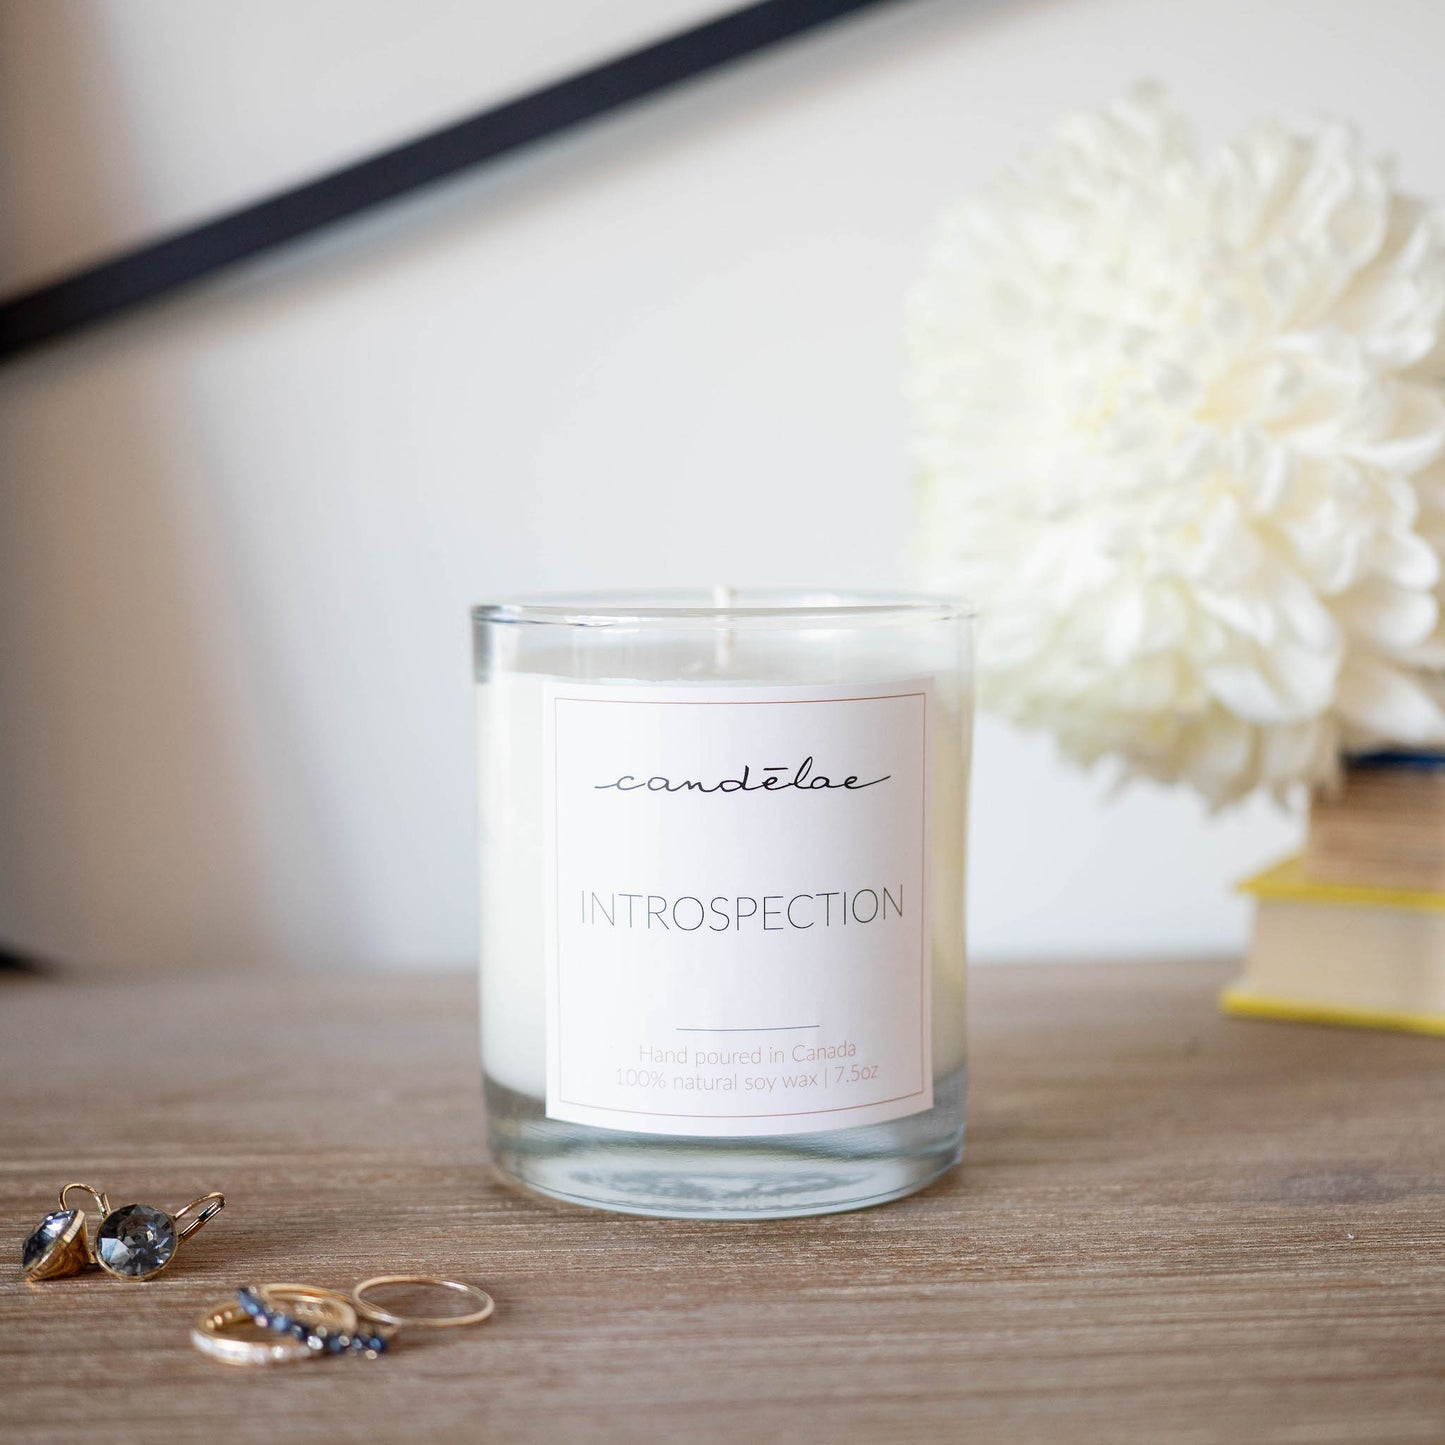 The soy wax scented candle from candēlae named Introspection is set around rings and earrings